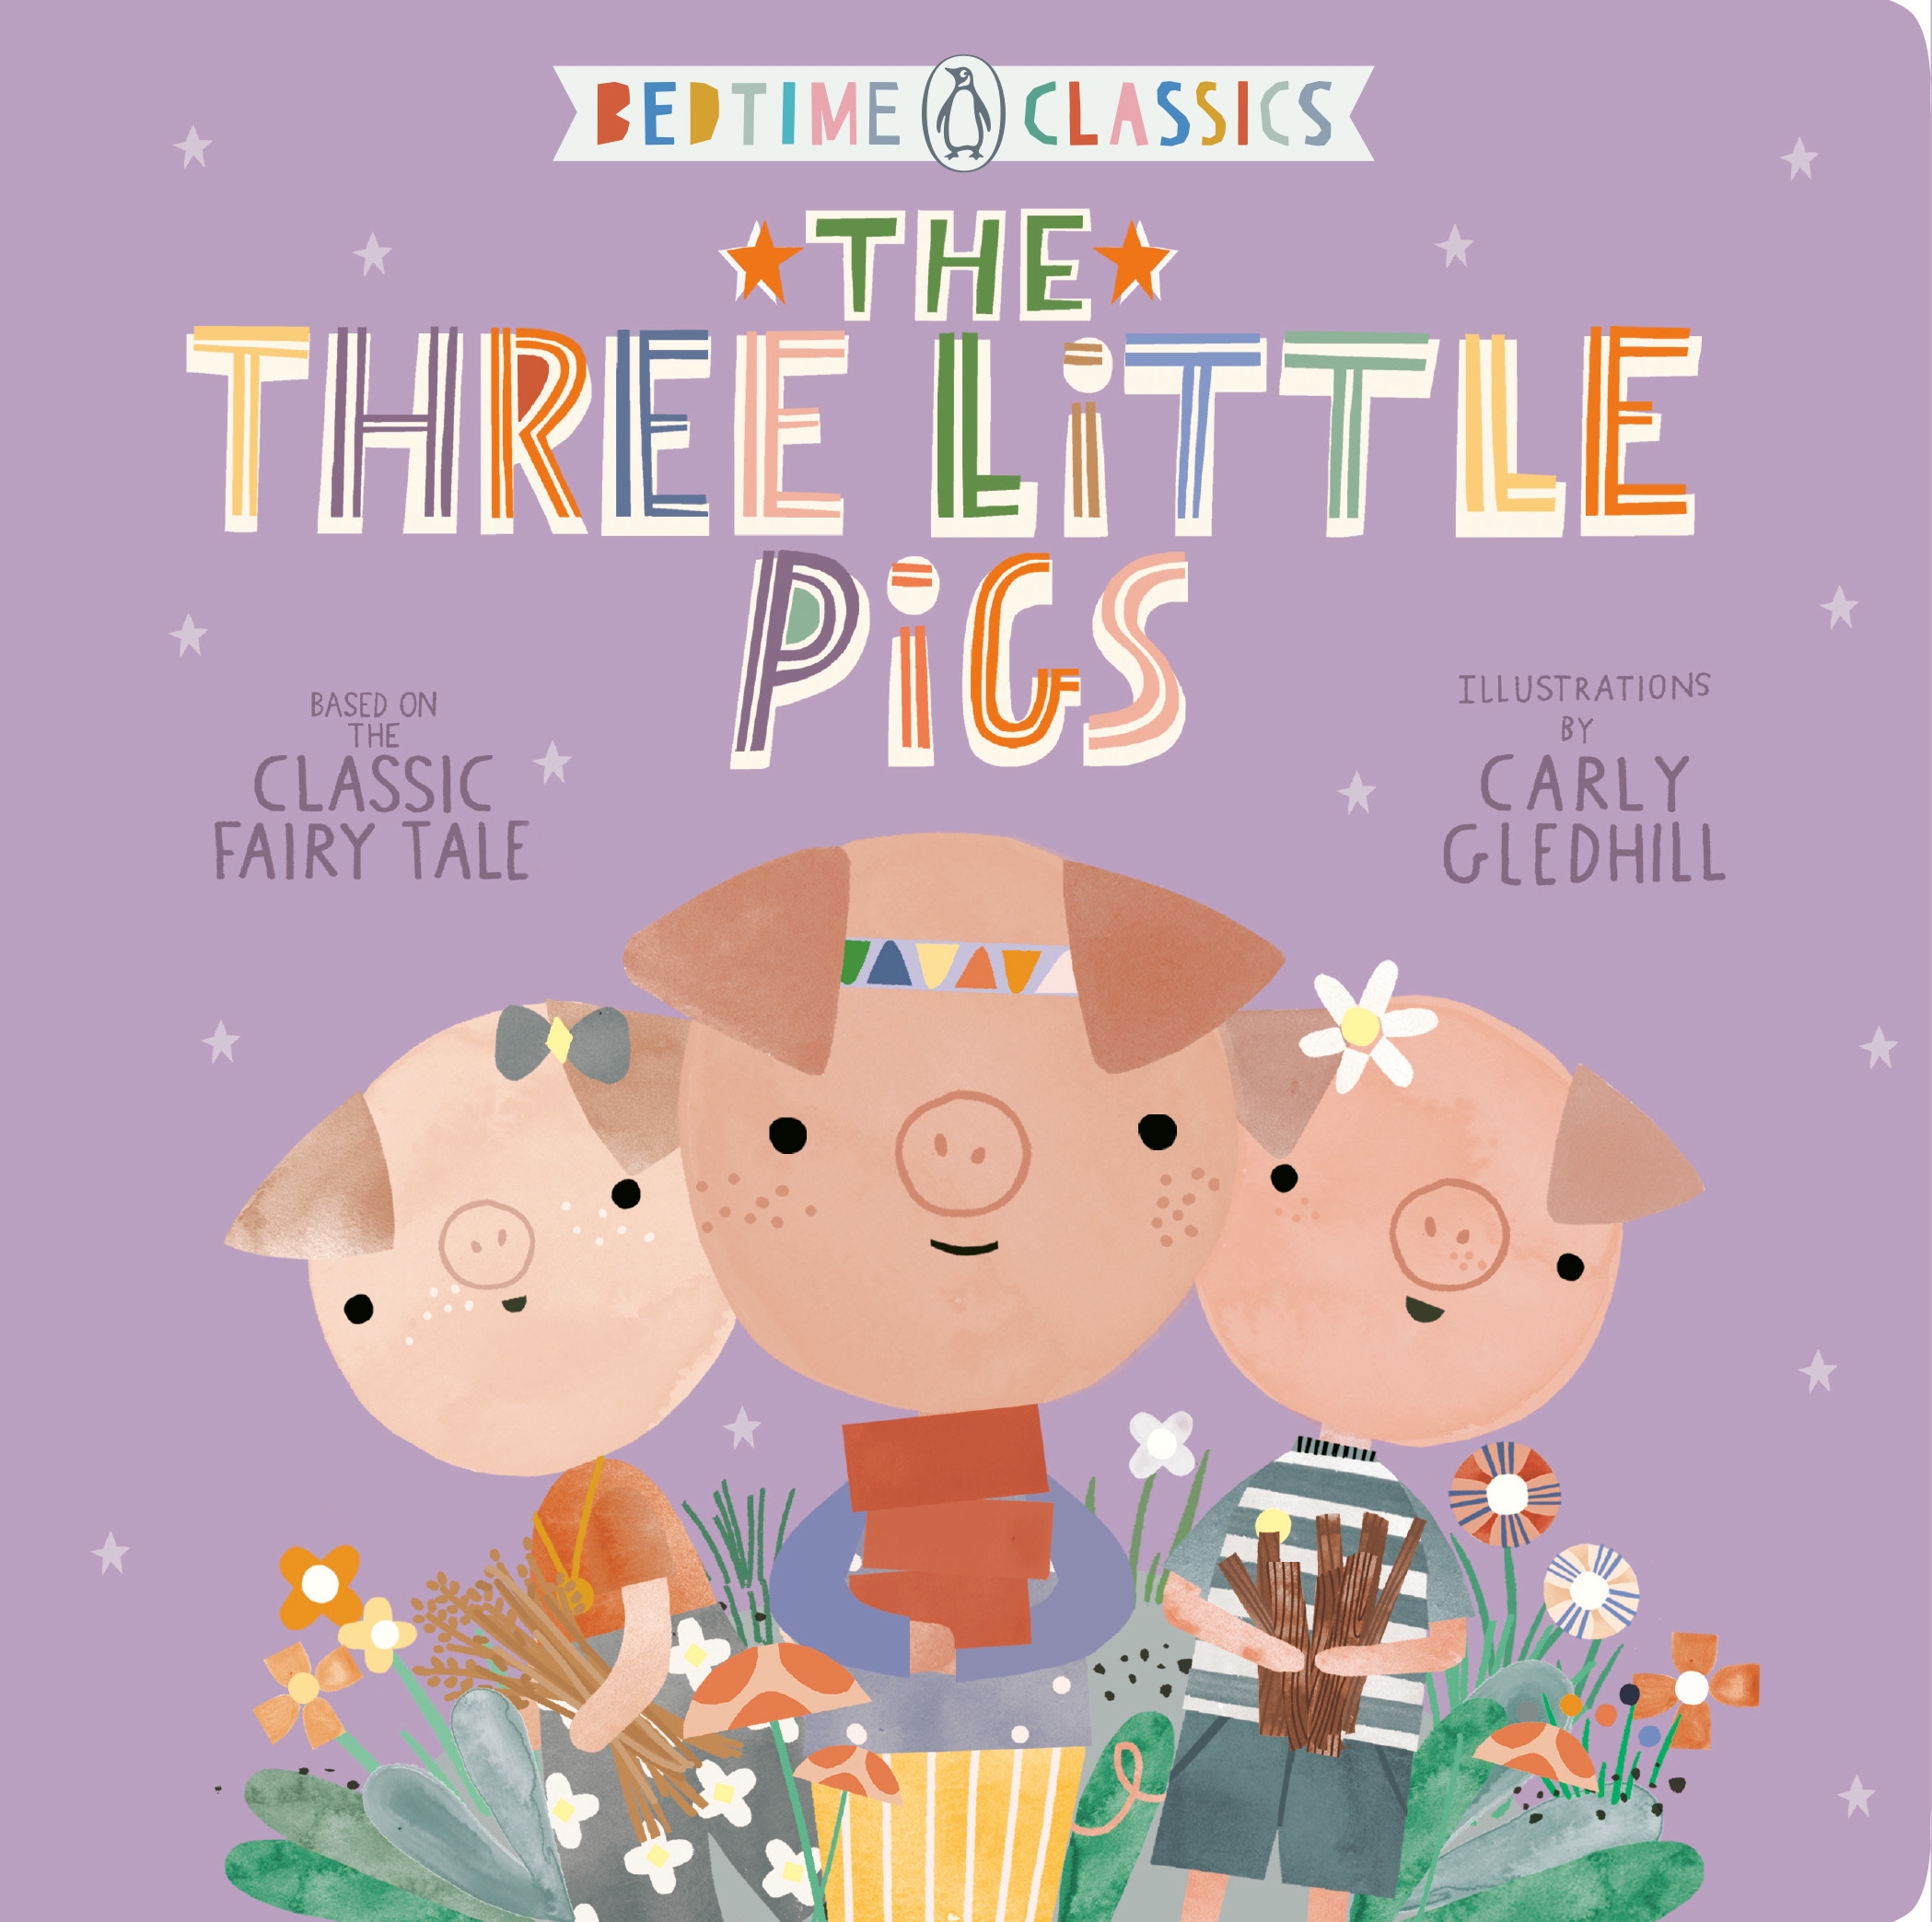 The Three Little Pigs by Illustrated by Carly Gledhill - Penguin Books